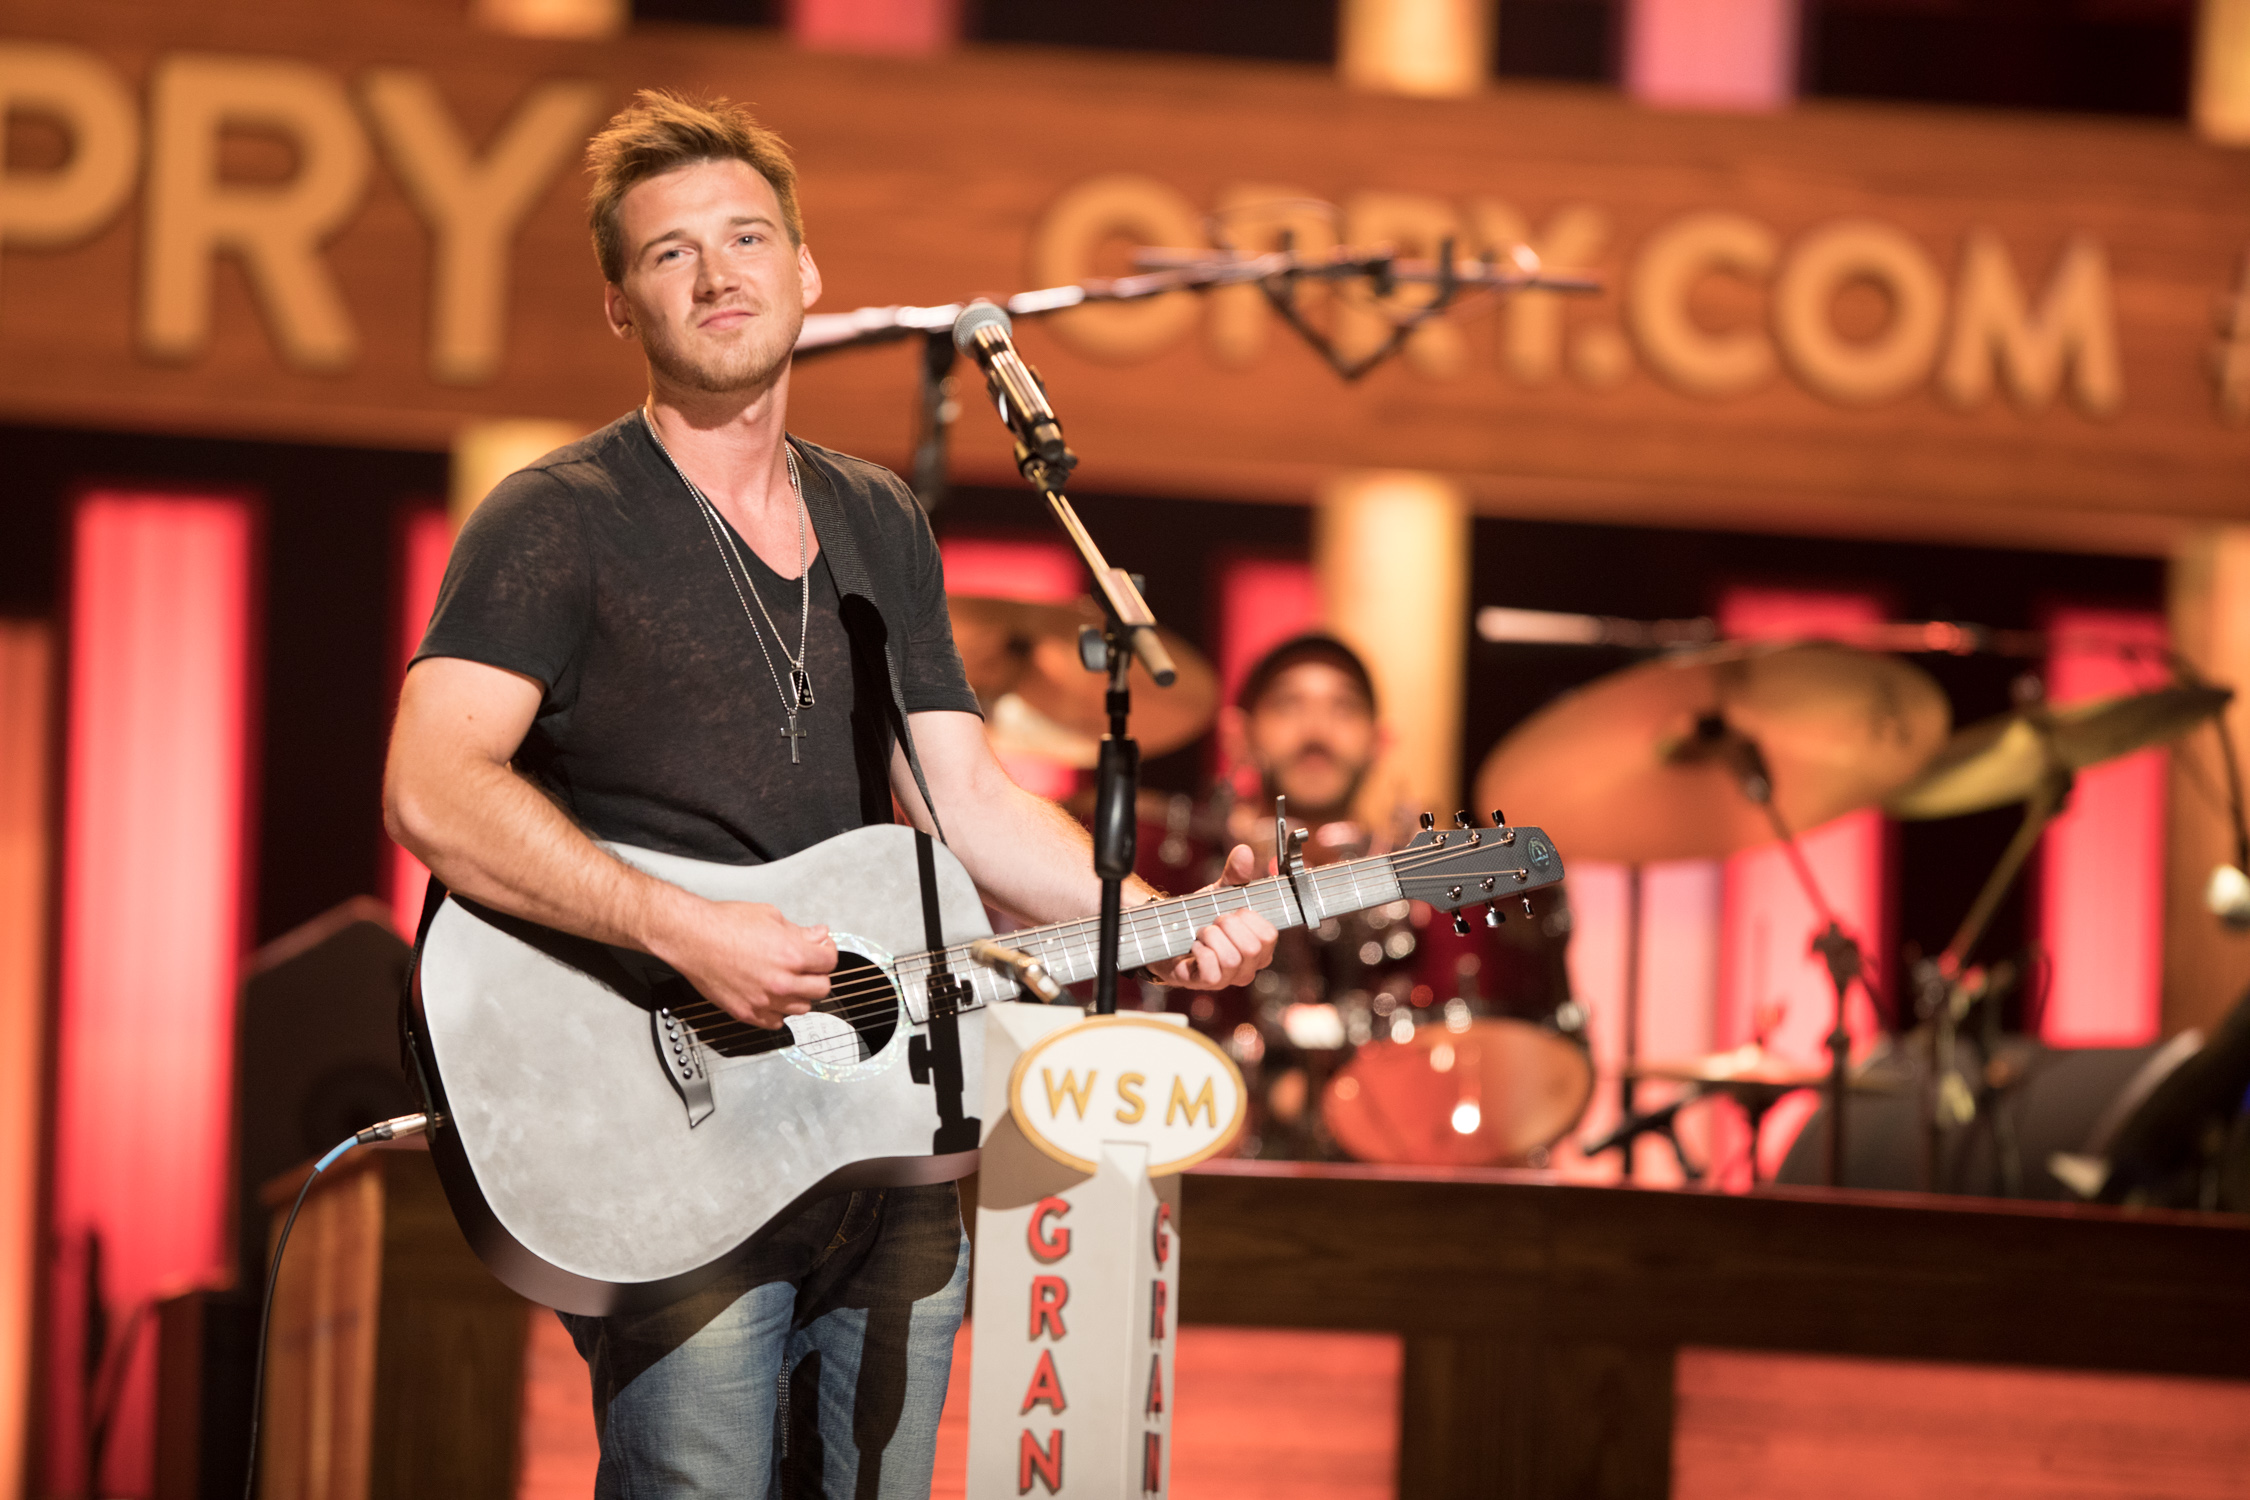 Morgan Wallen Makes Grand Ole Opry Debut – All the Details on His Performance